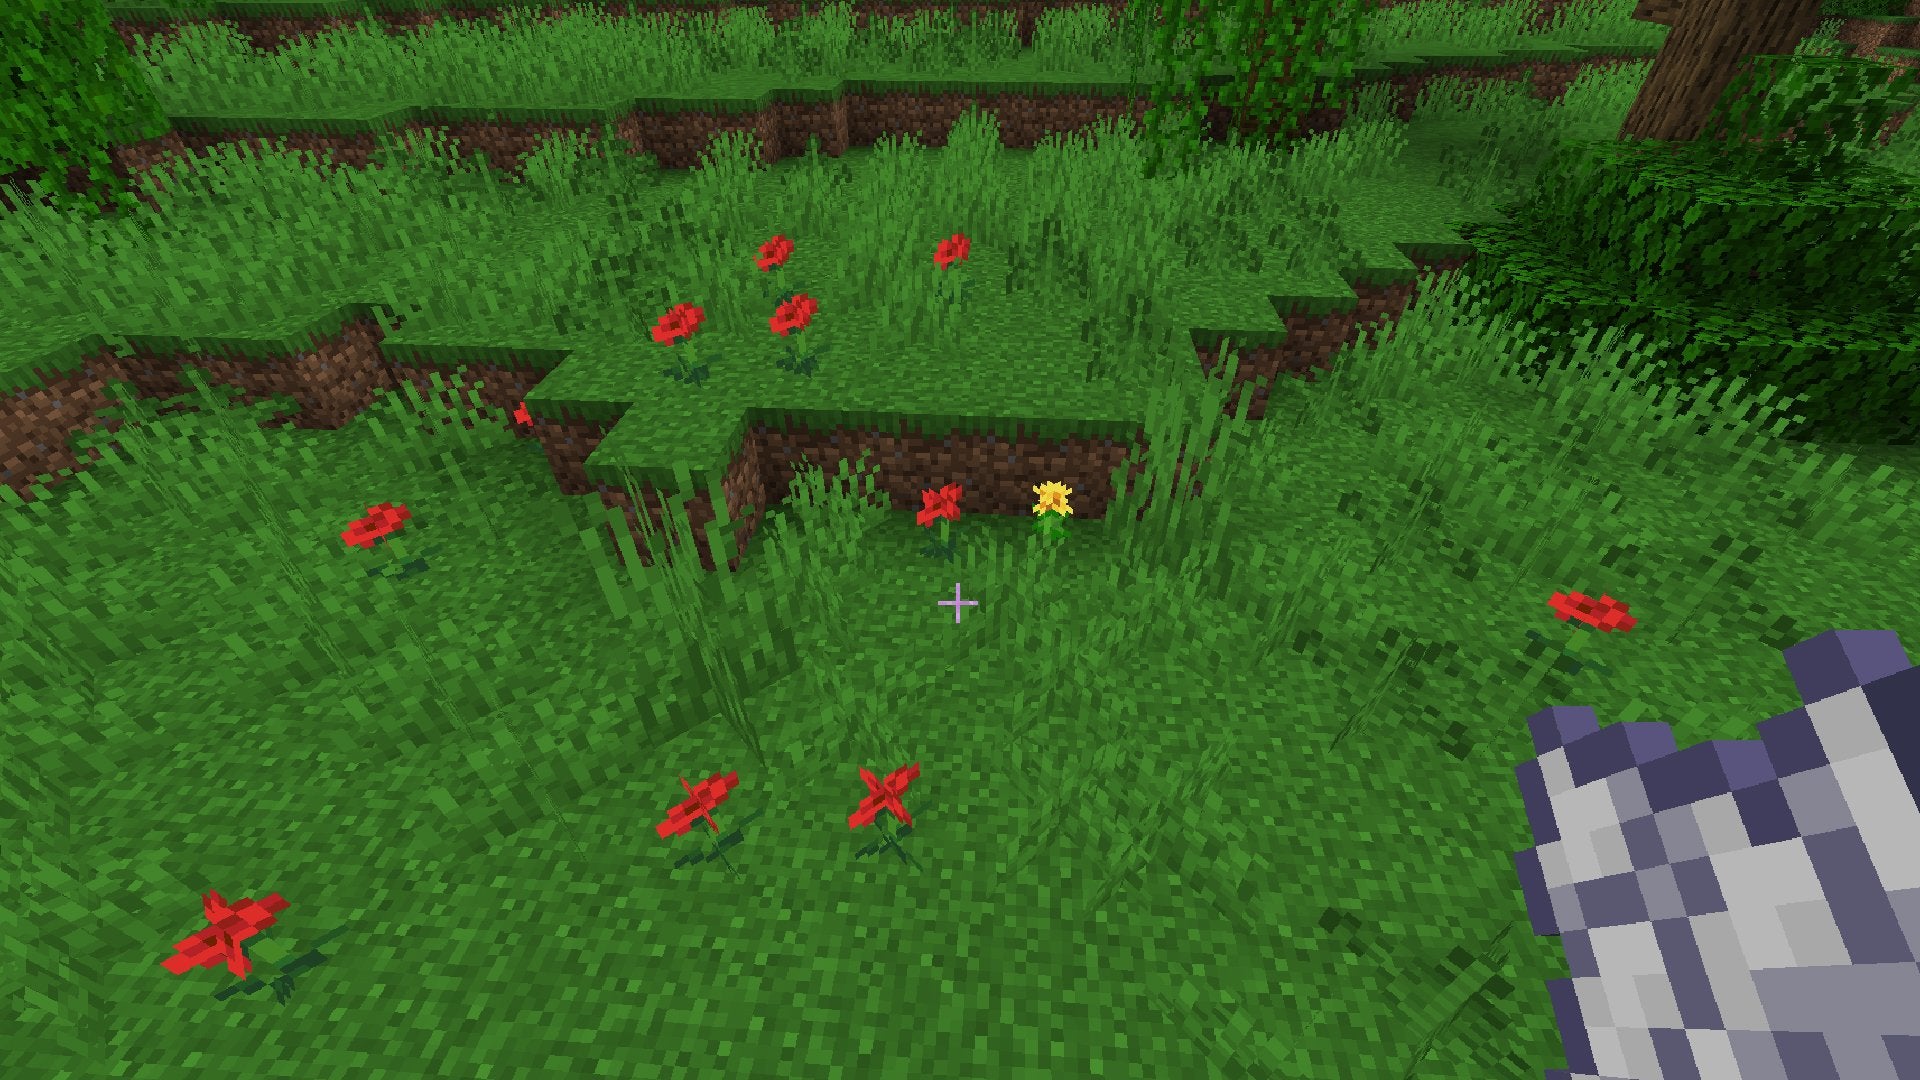 A player using Bone Meal on grass in Minecraft to grow Flowers.